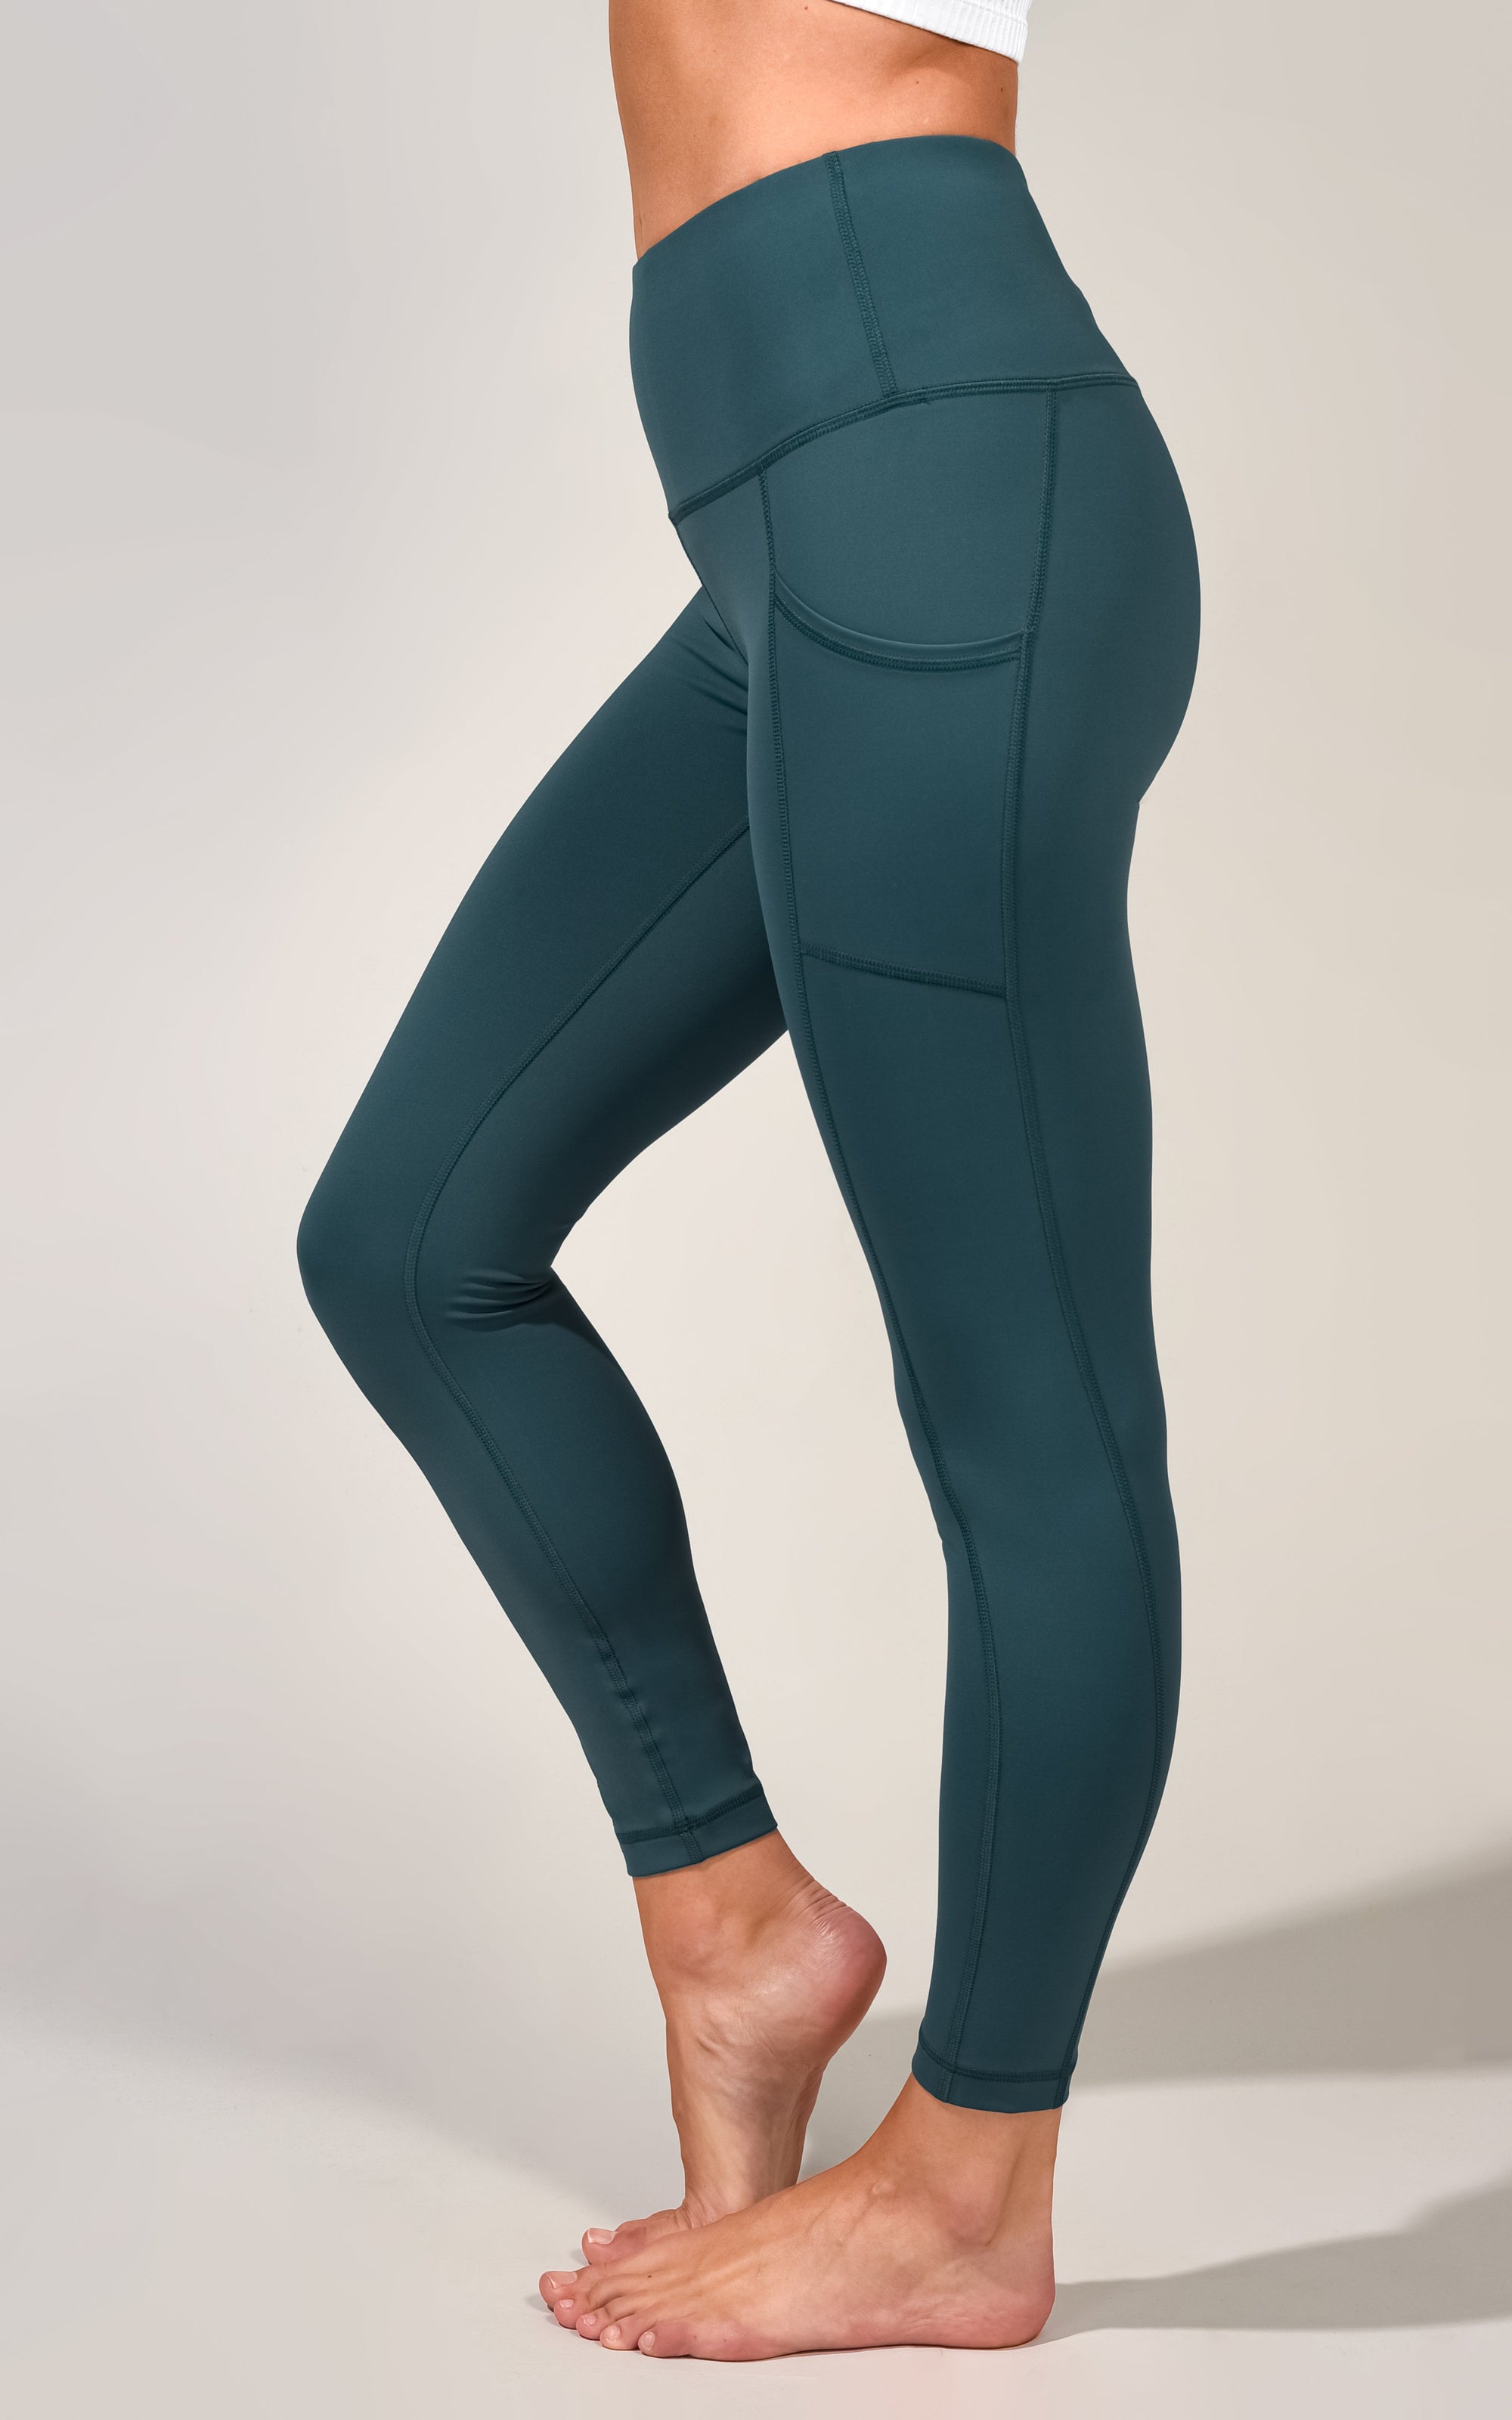 Squat Proof Yoga Pants With Pockets - 90 Degree by Reflex ⋆ Trendy Dancer